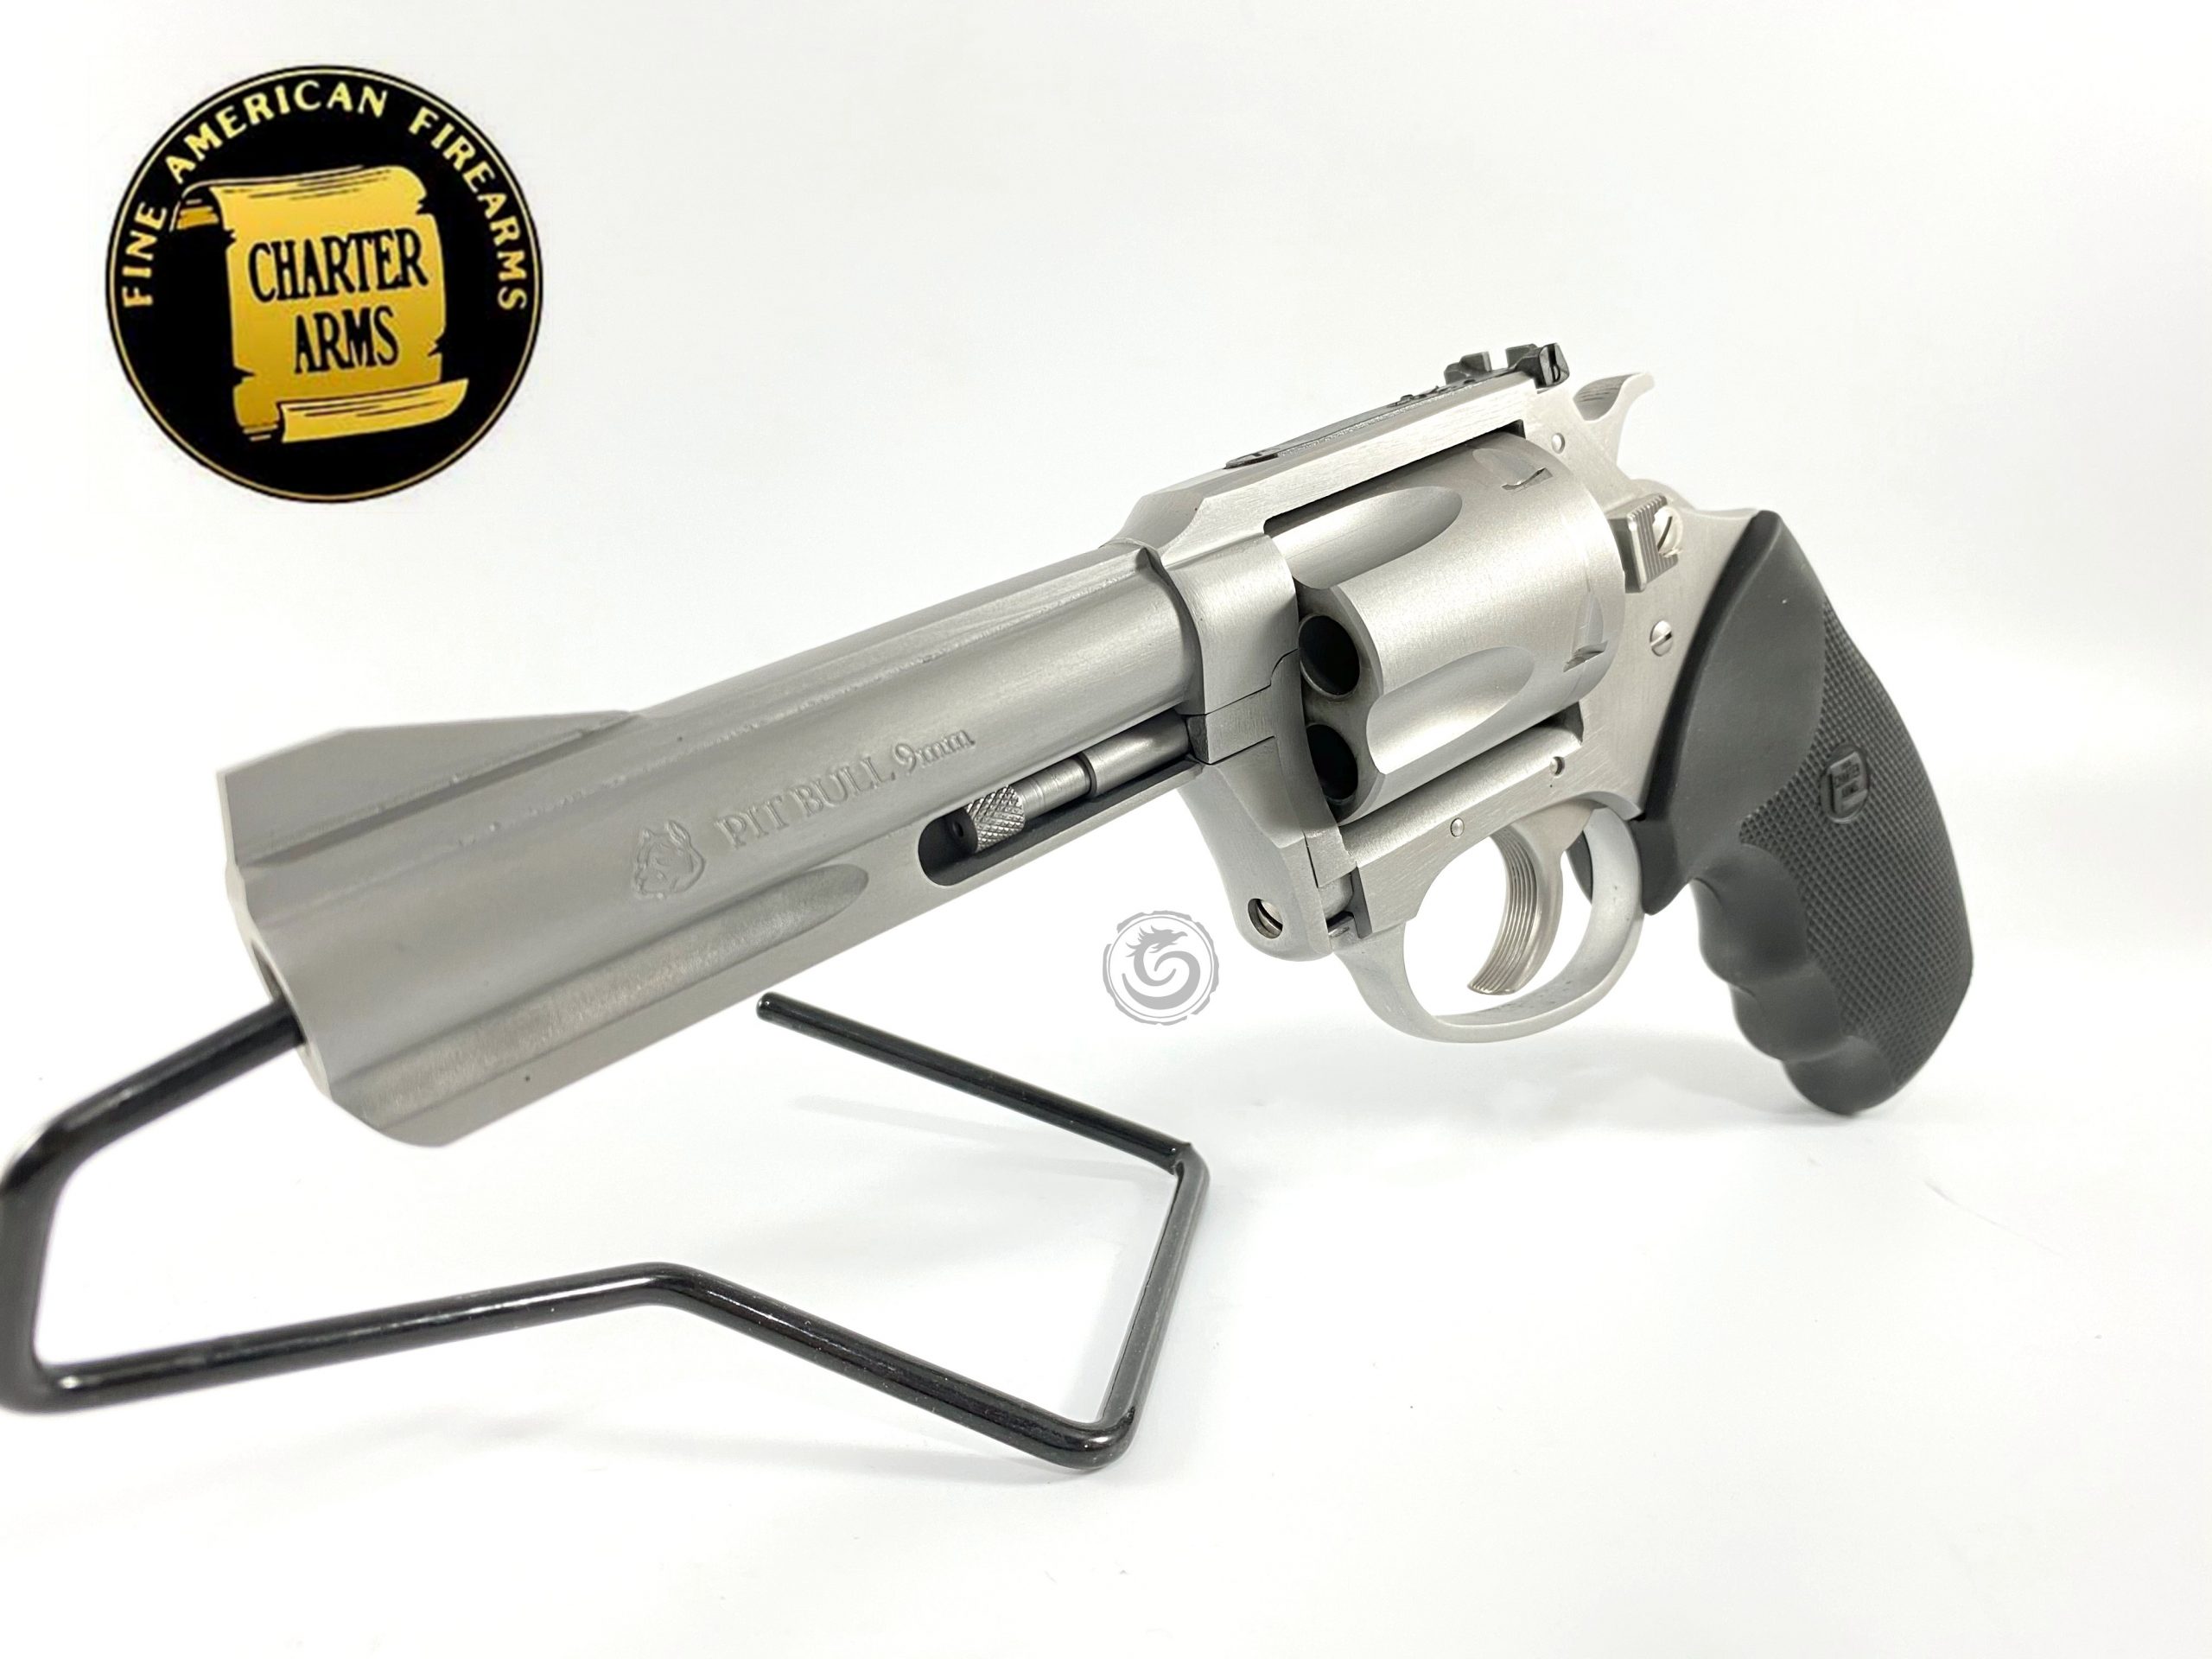 is charter arms revolvers any good